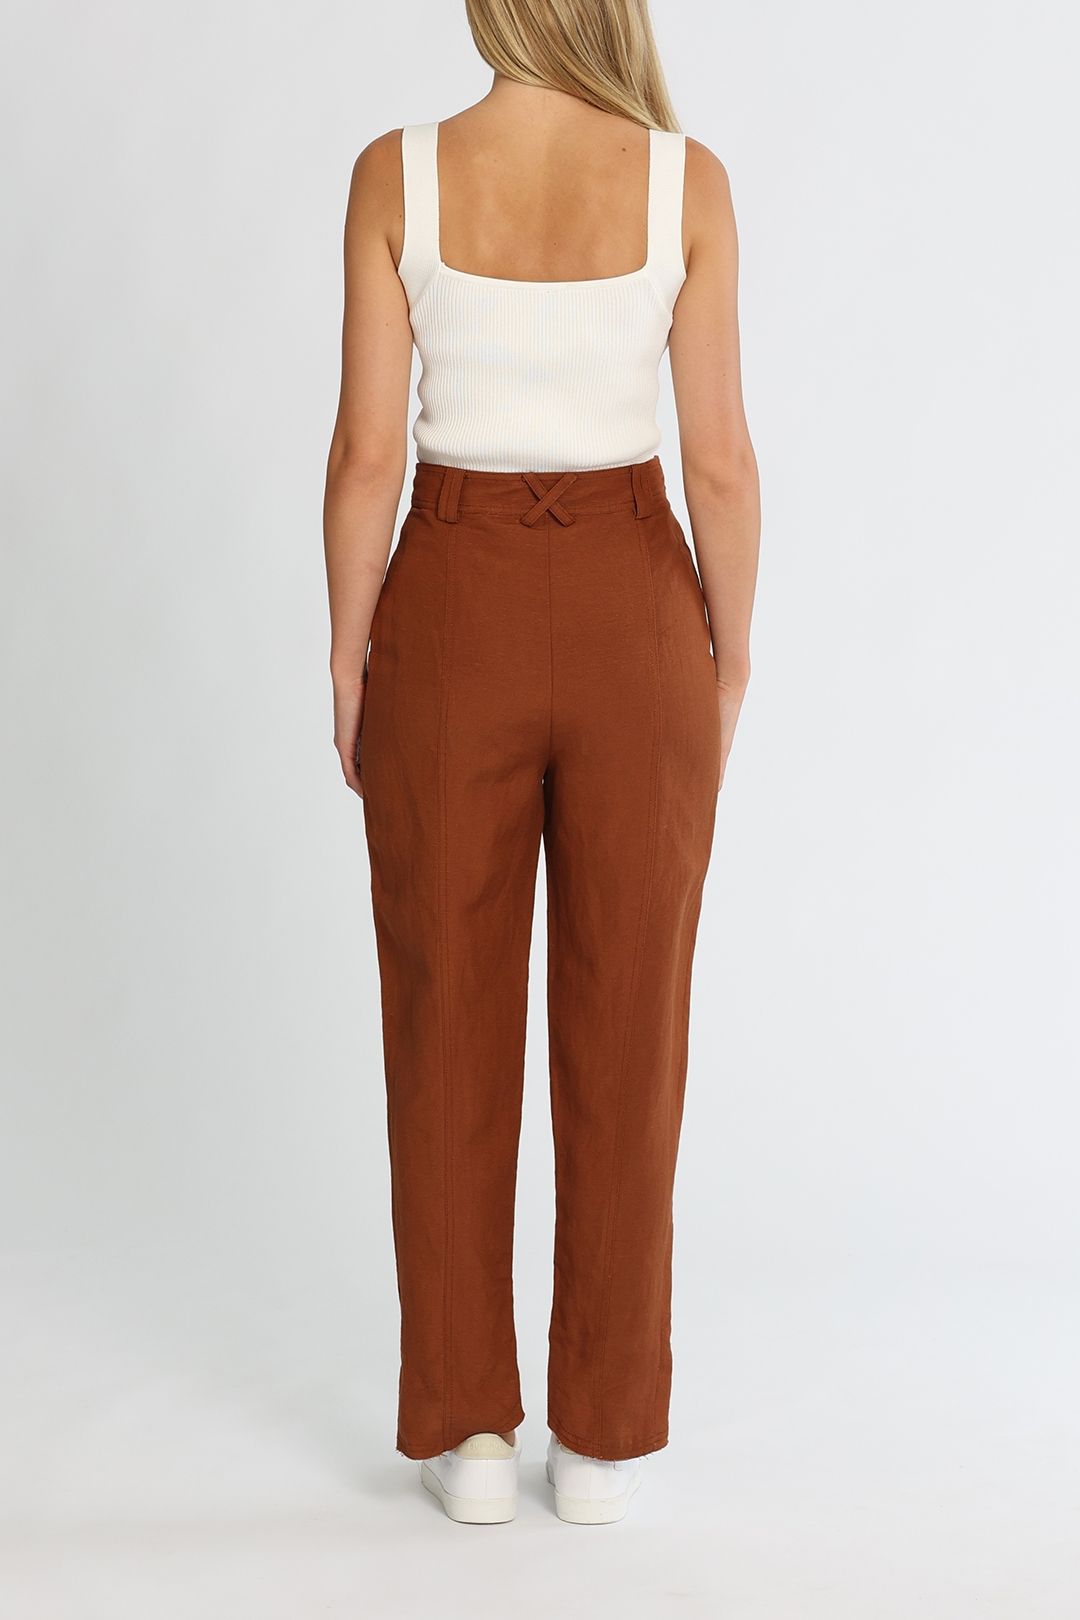 AJE Admiration Pant Coffee Tapered